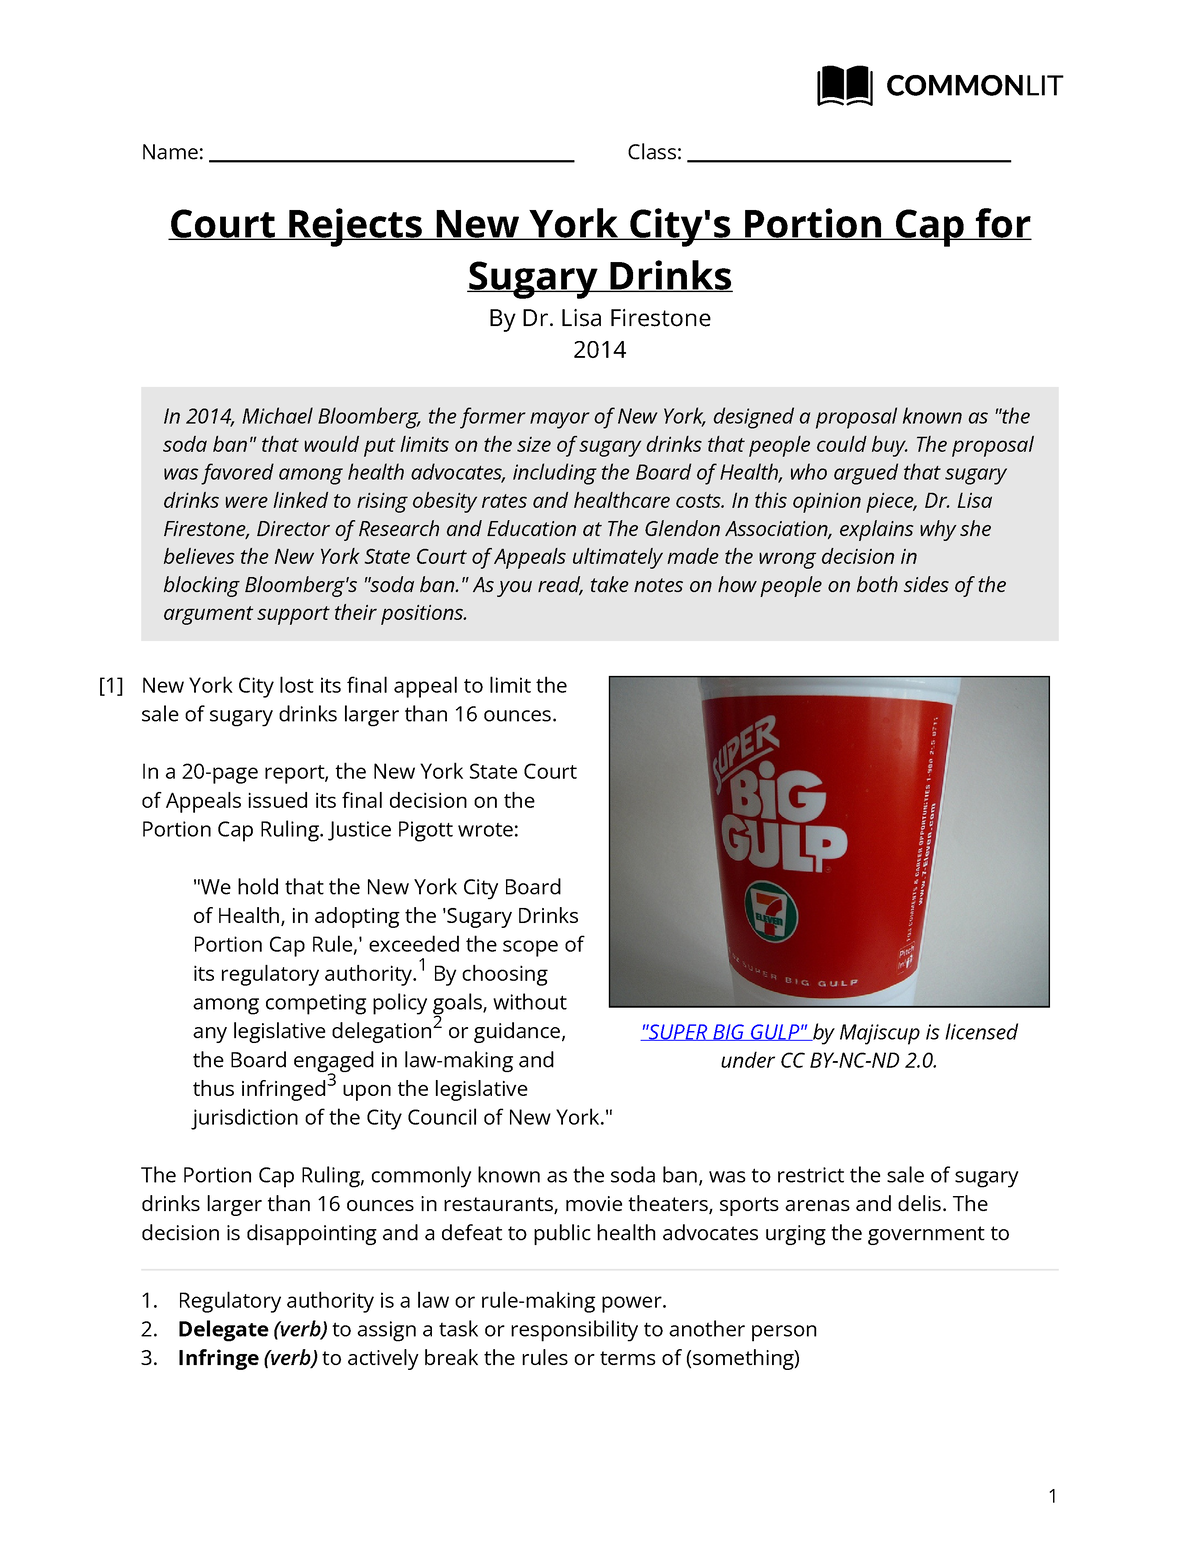 Court Rejects New York Citys Portion Cap For Sugary Drinks Teacher 14